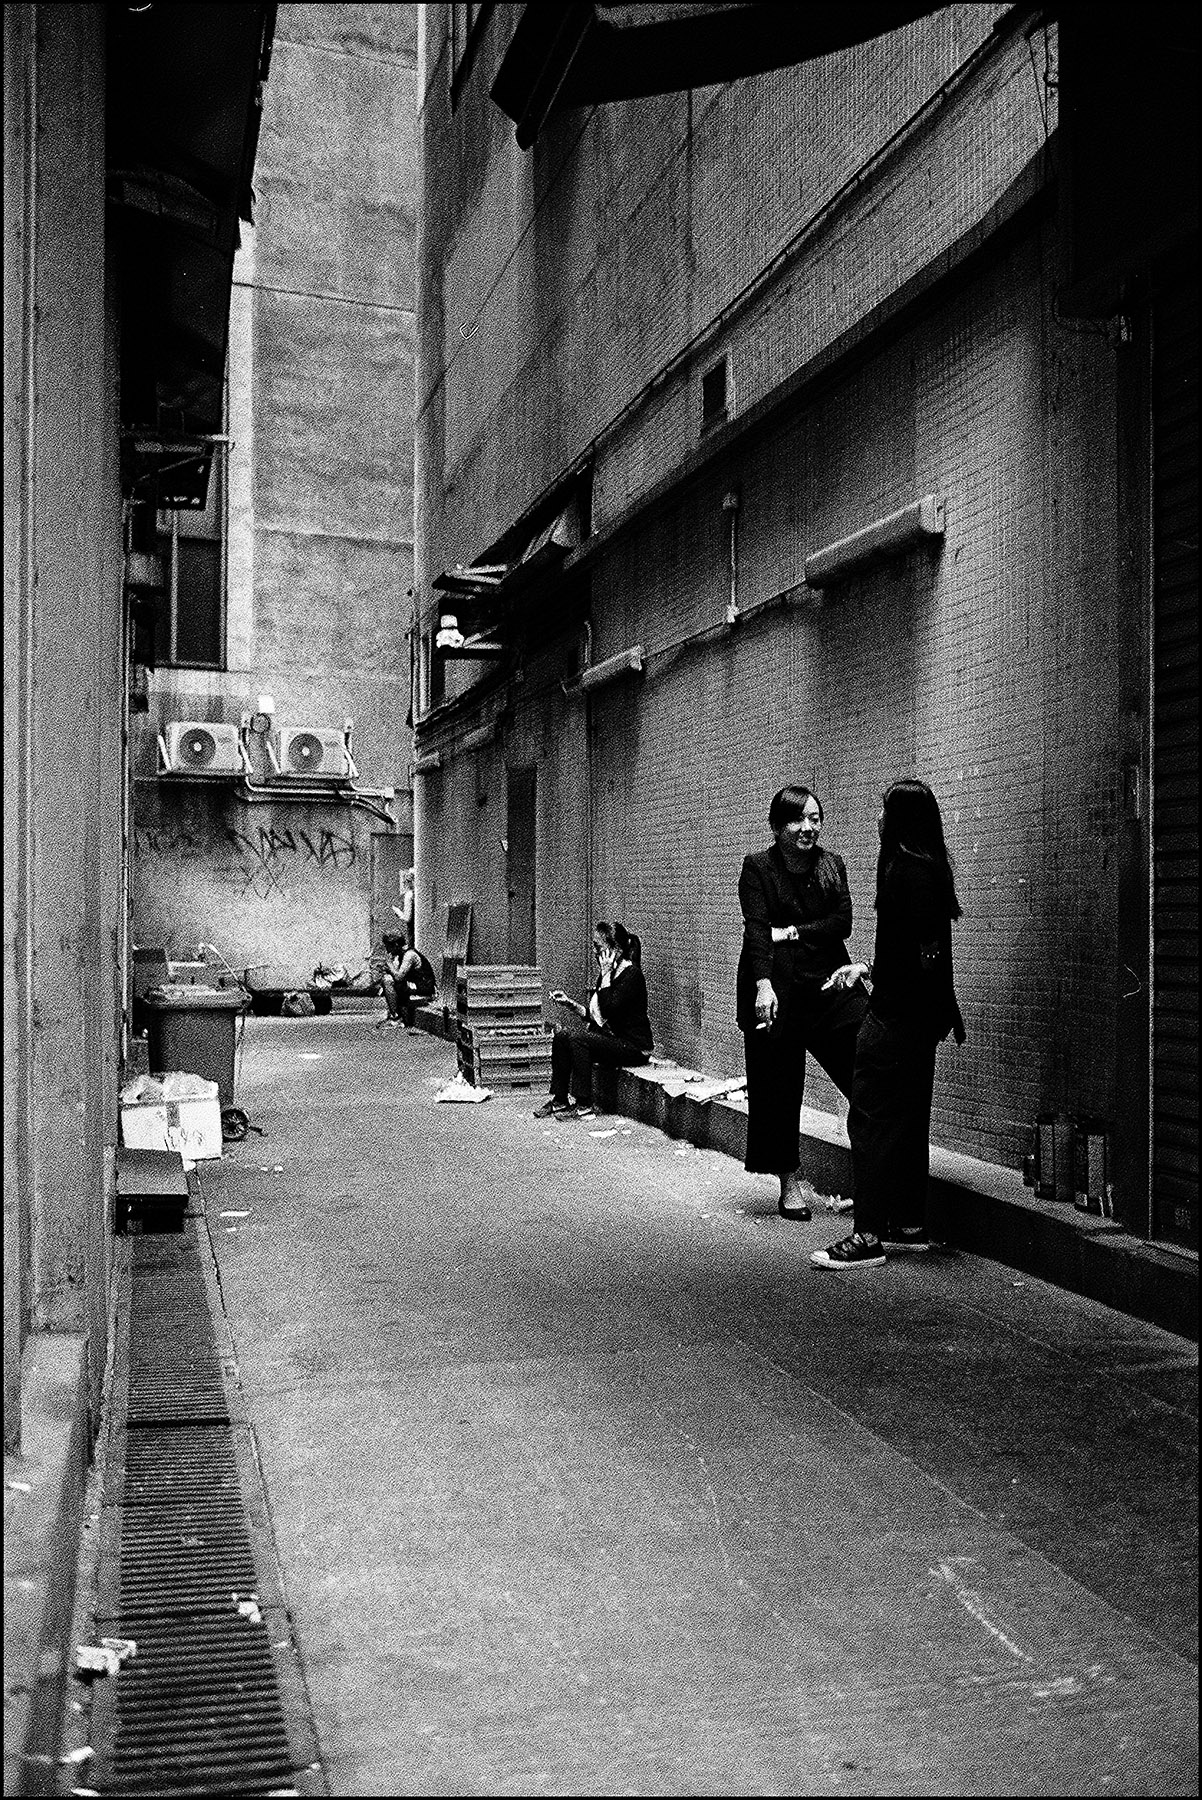 people chatting in a backalley